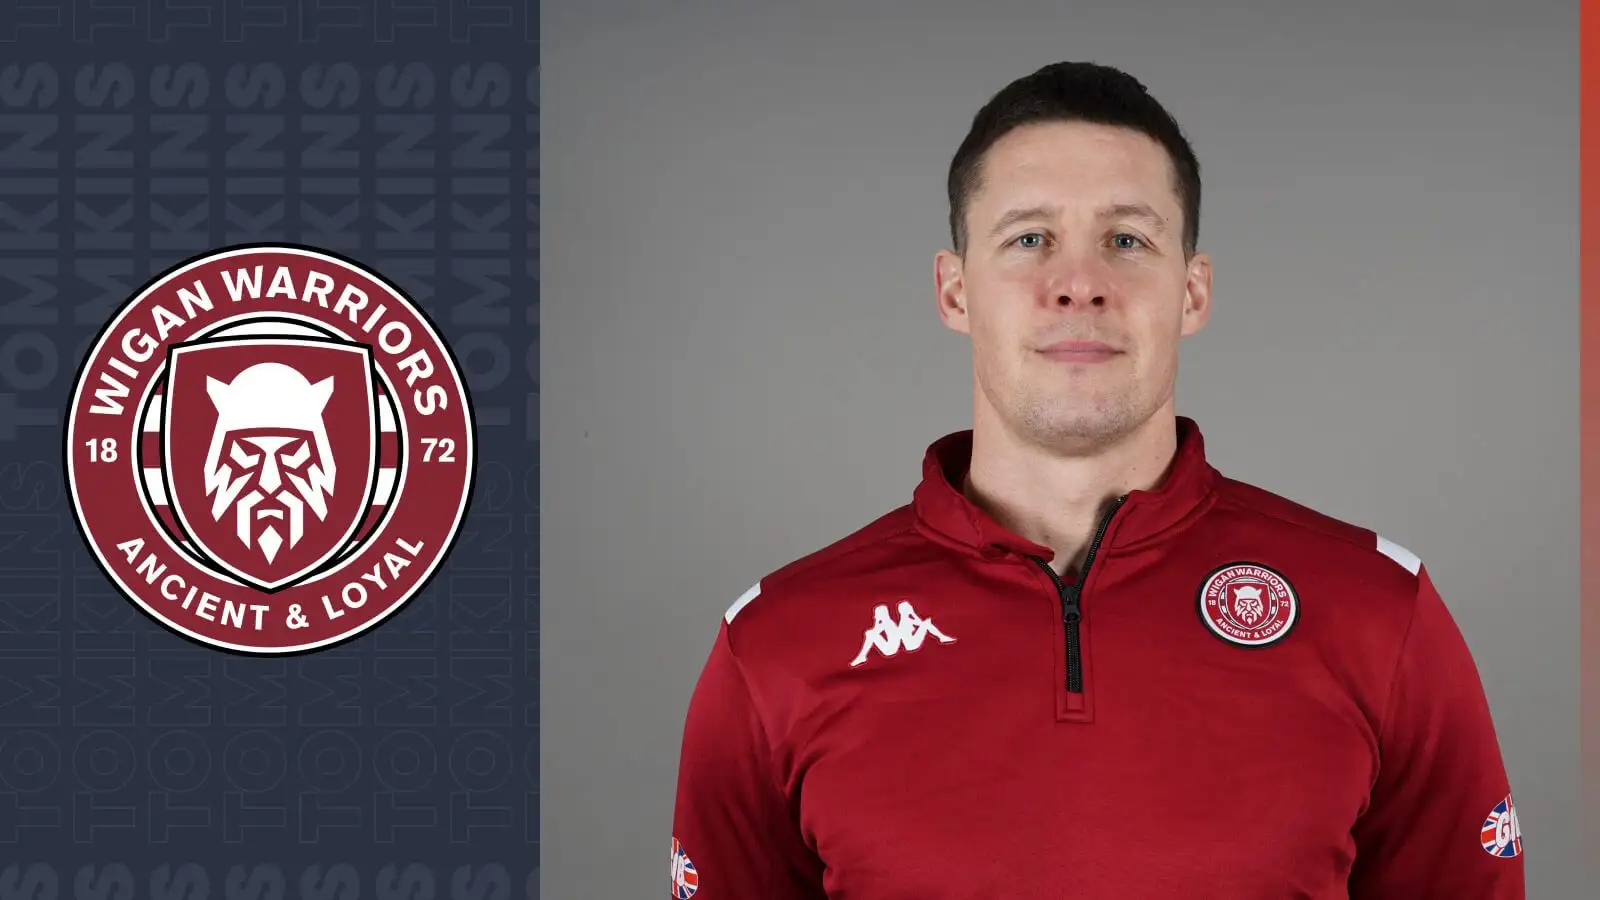 Joel Tomkins makes Wigan Warriors return in coaching role after Fire Service apprenticeship: ‘There are exciting times ahead’